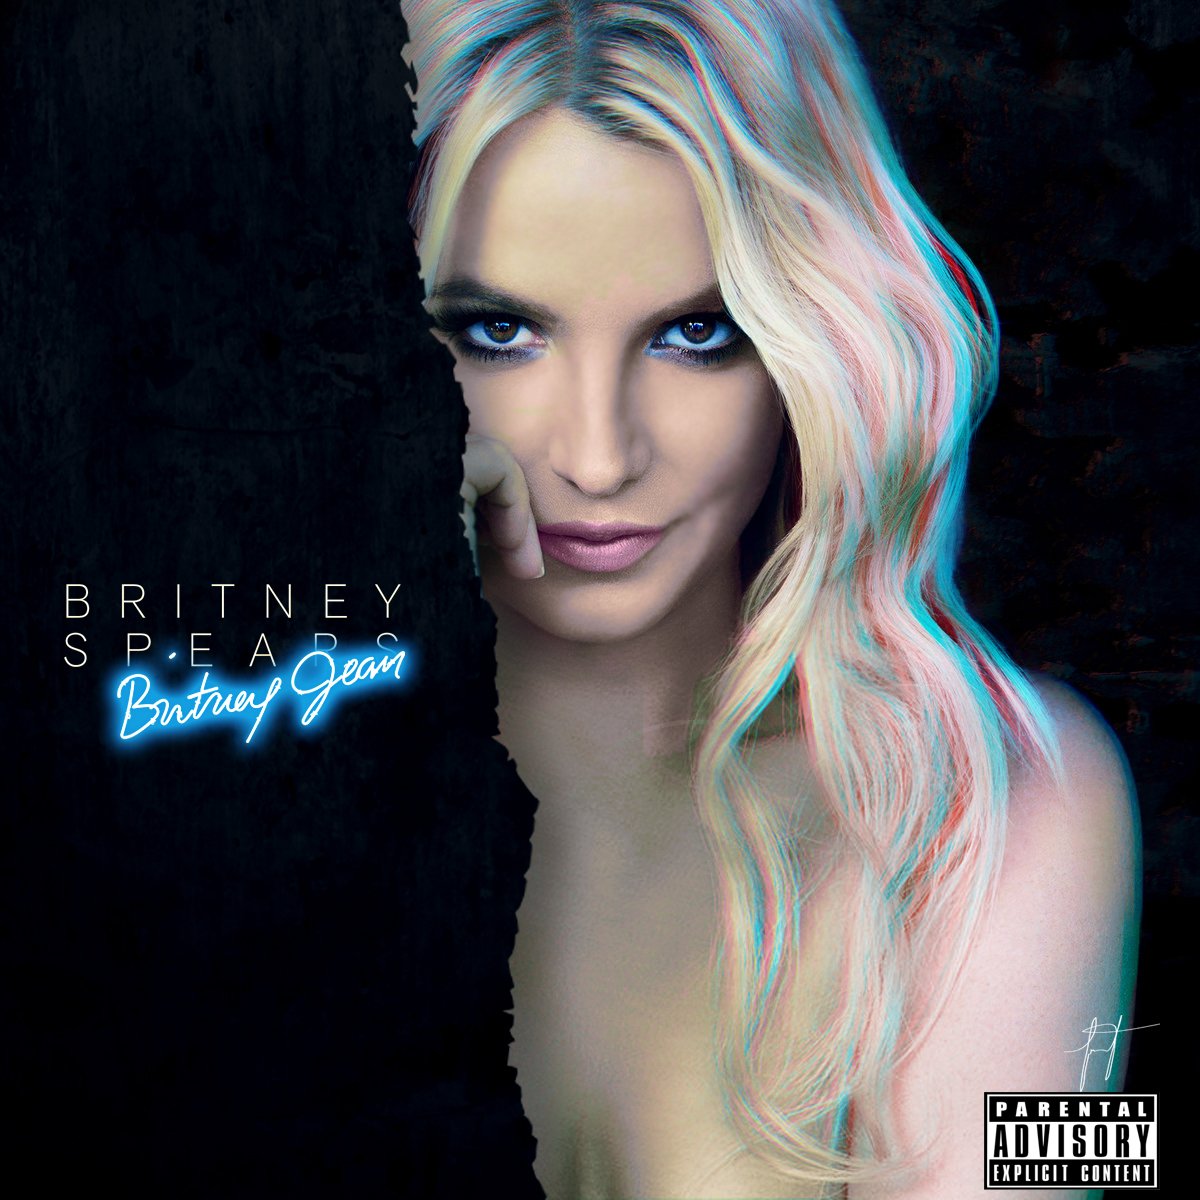 The best album covers for each album - The Britney Spears ...